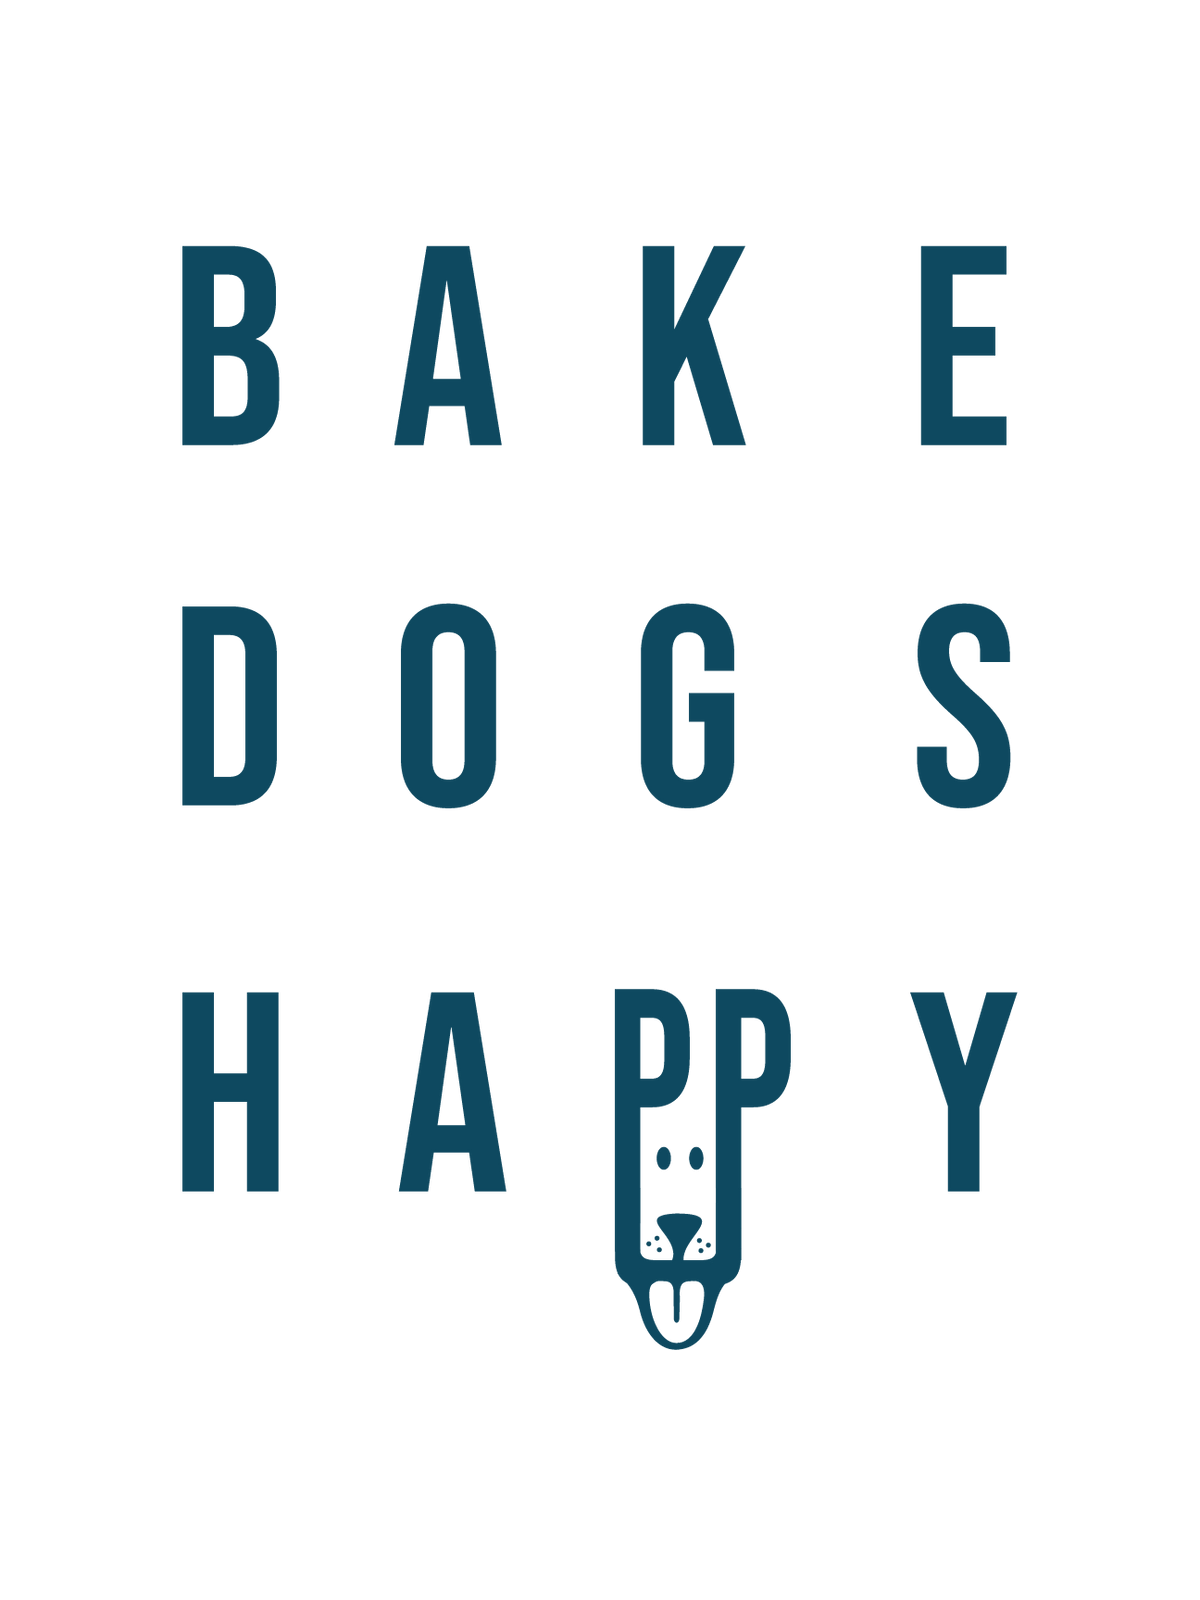 The Bake Dogs Happy logo, with the two Ps in 